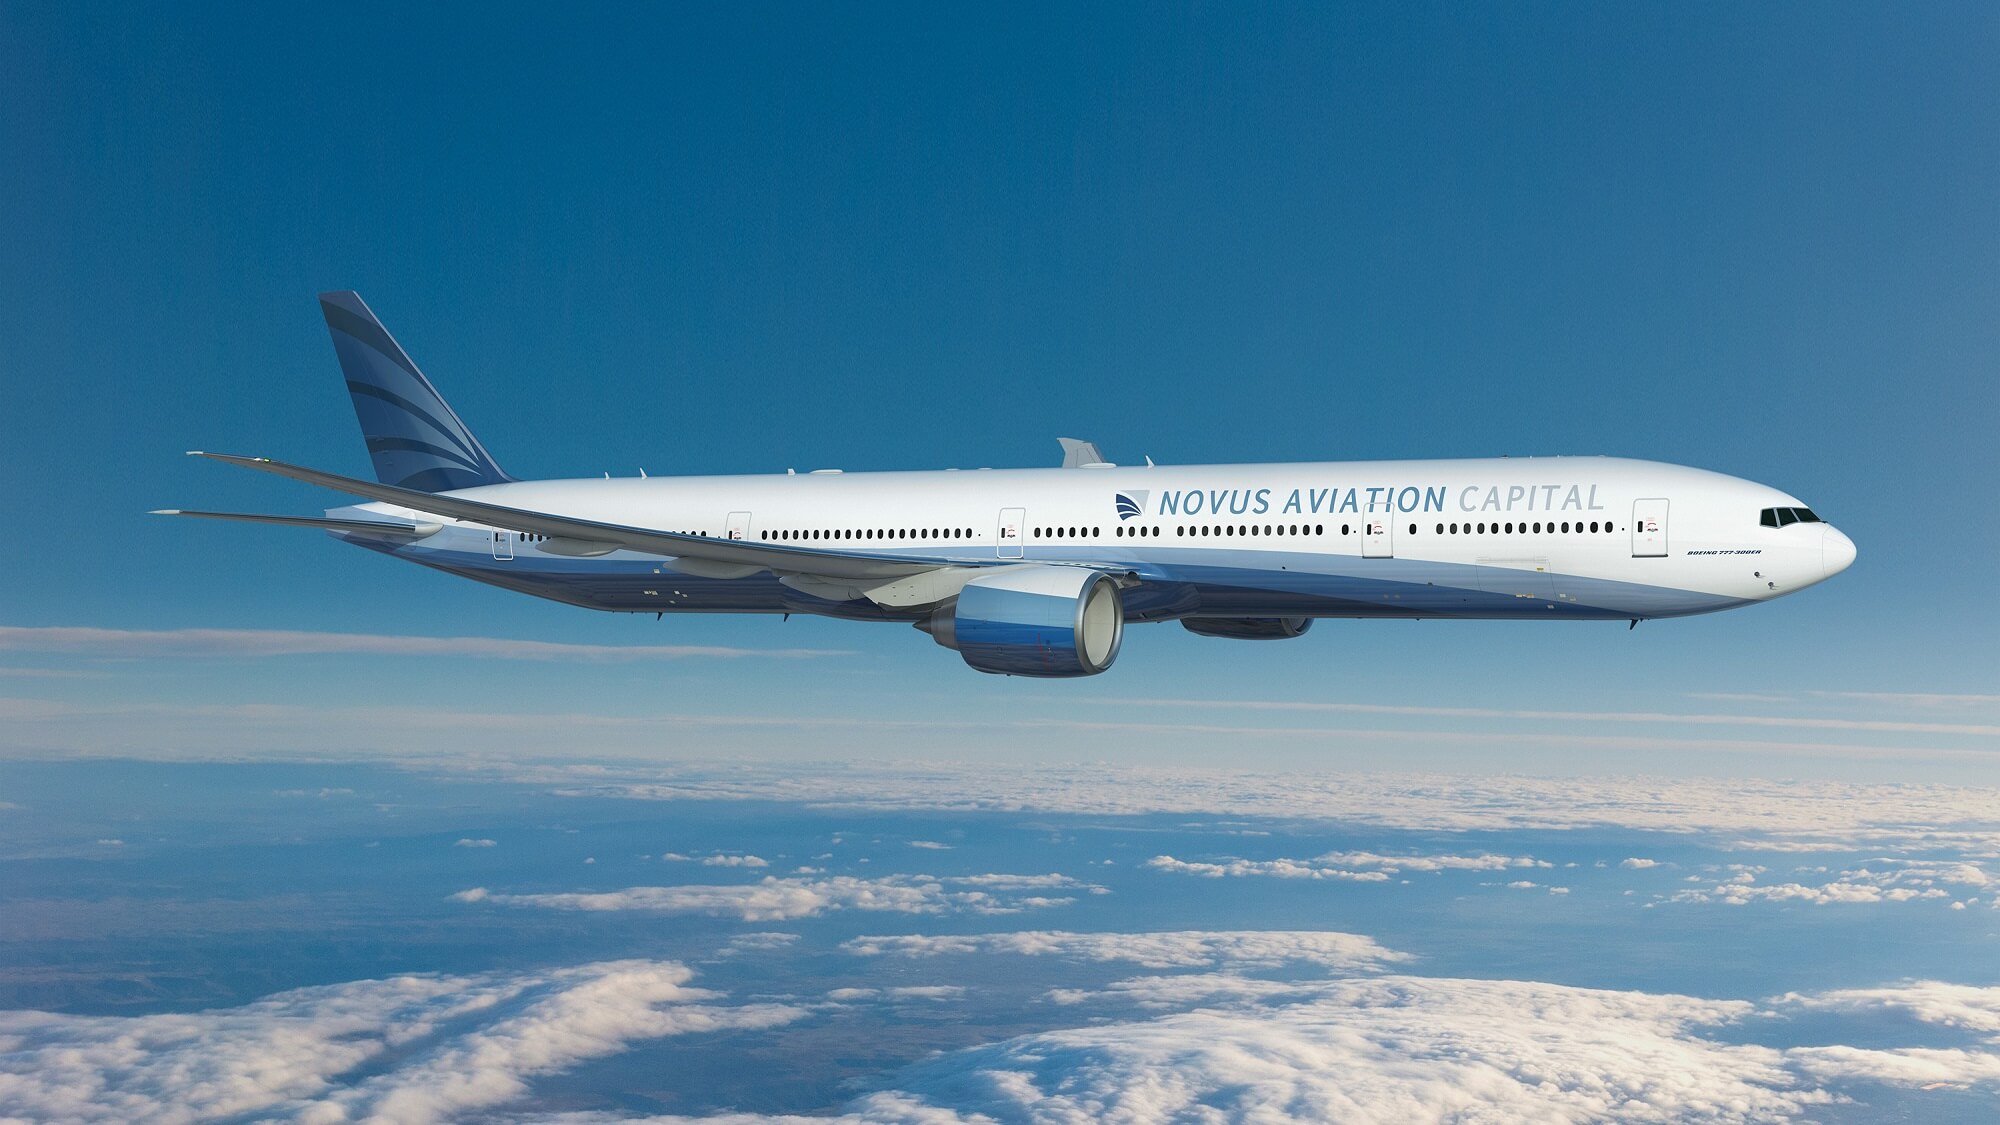 Novus Aviation Capital completes $423m financing deal for four 777-300ERs